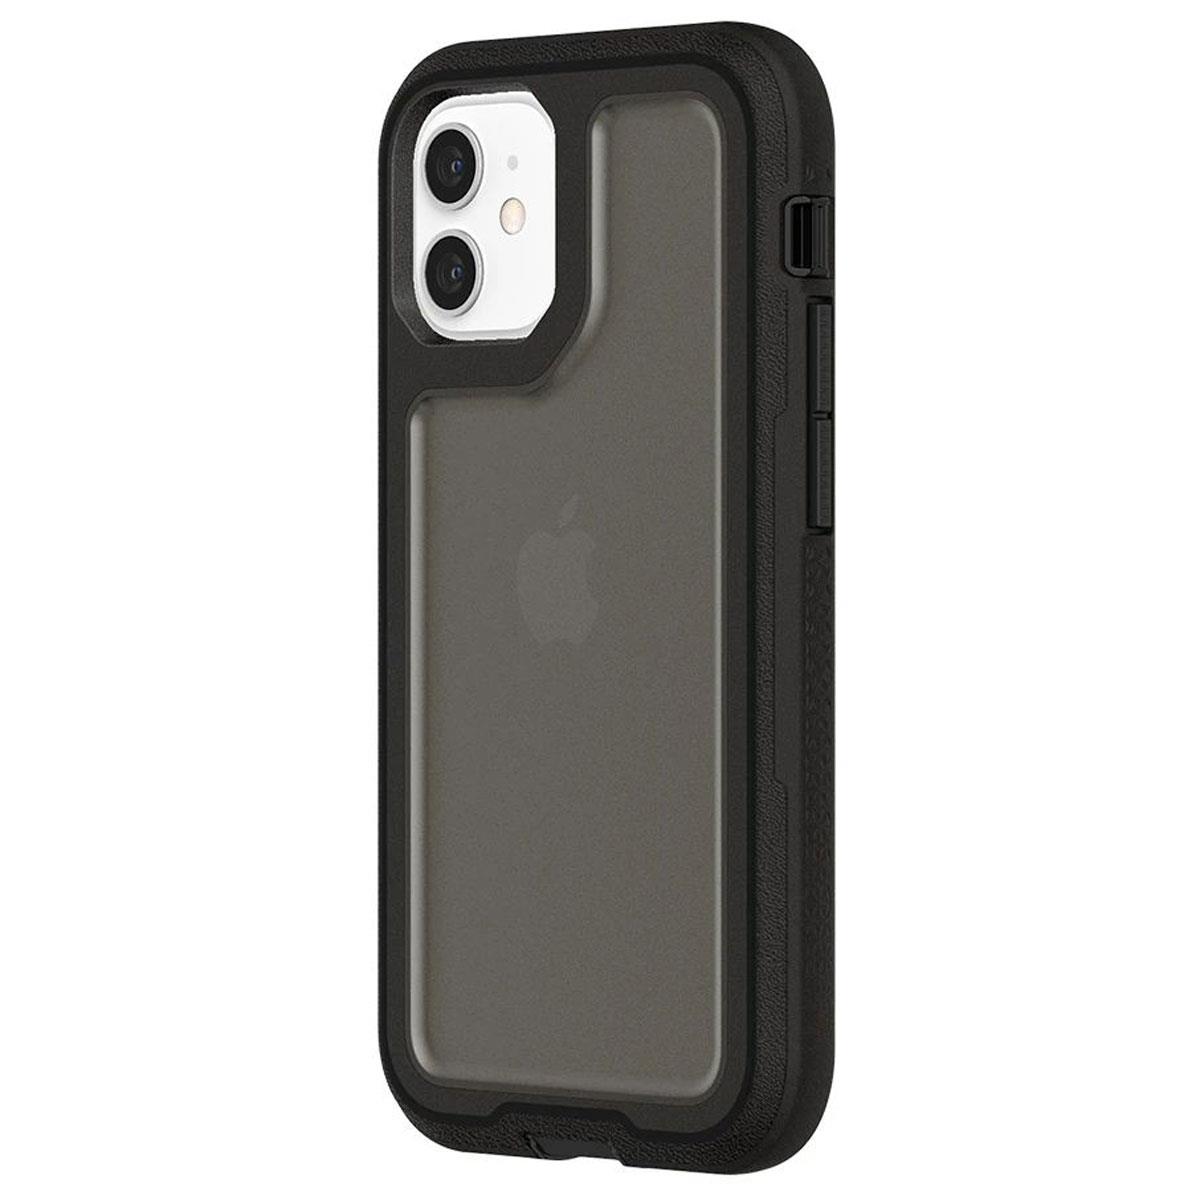 Image of Griffin Technology Survivor Extreme Case for iPhone 12 Mini